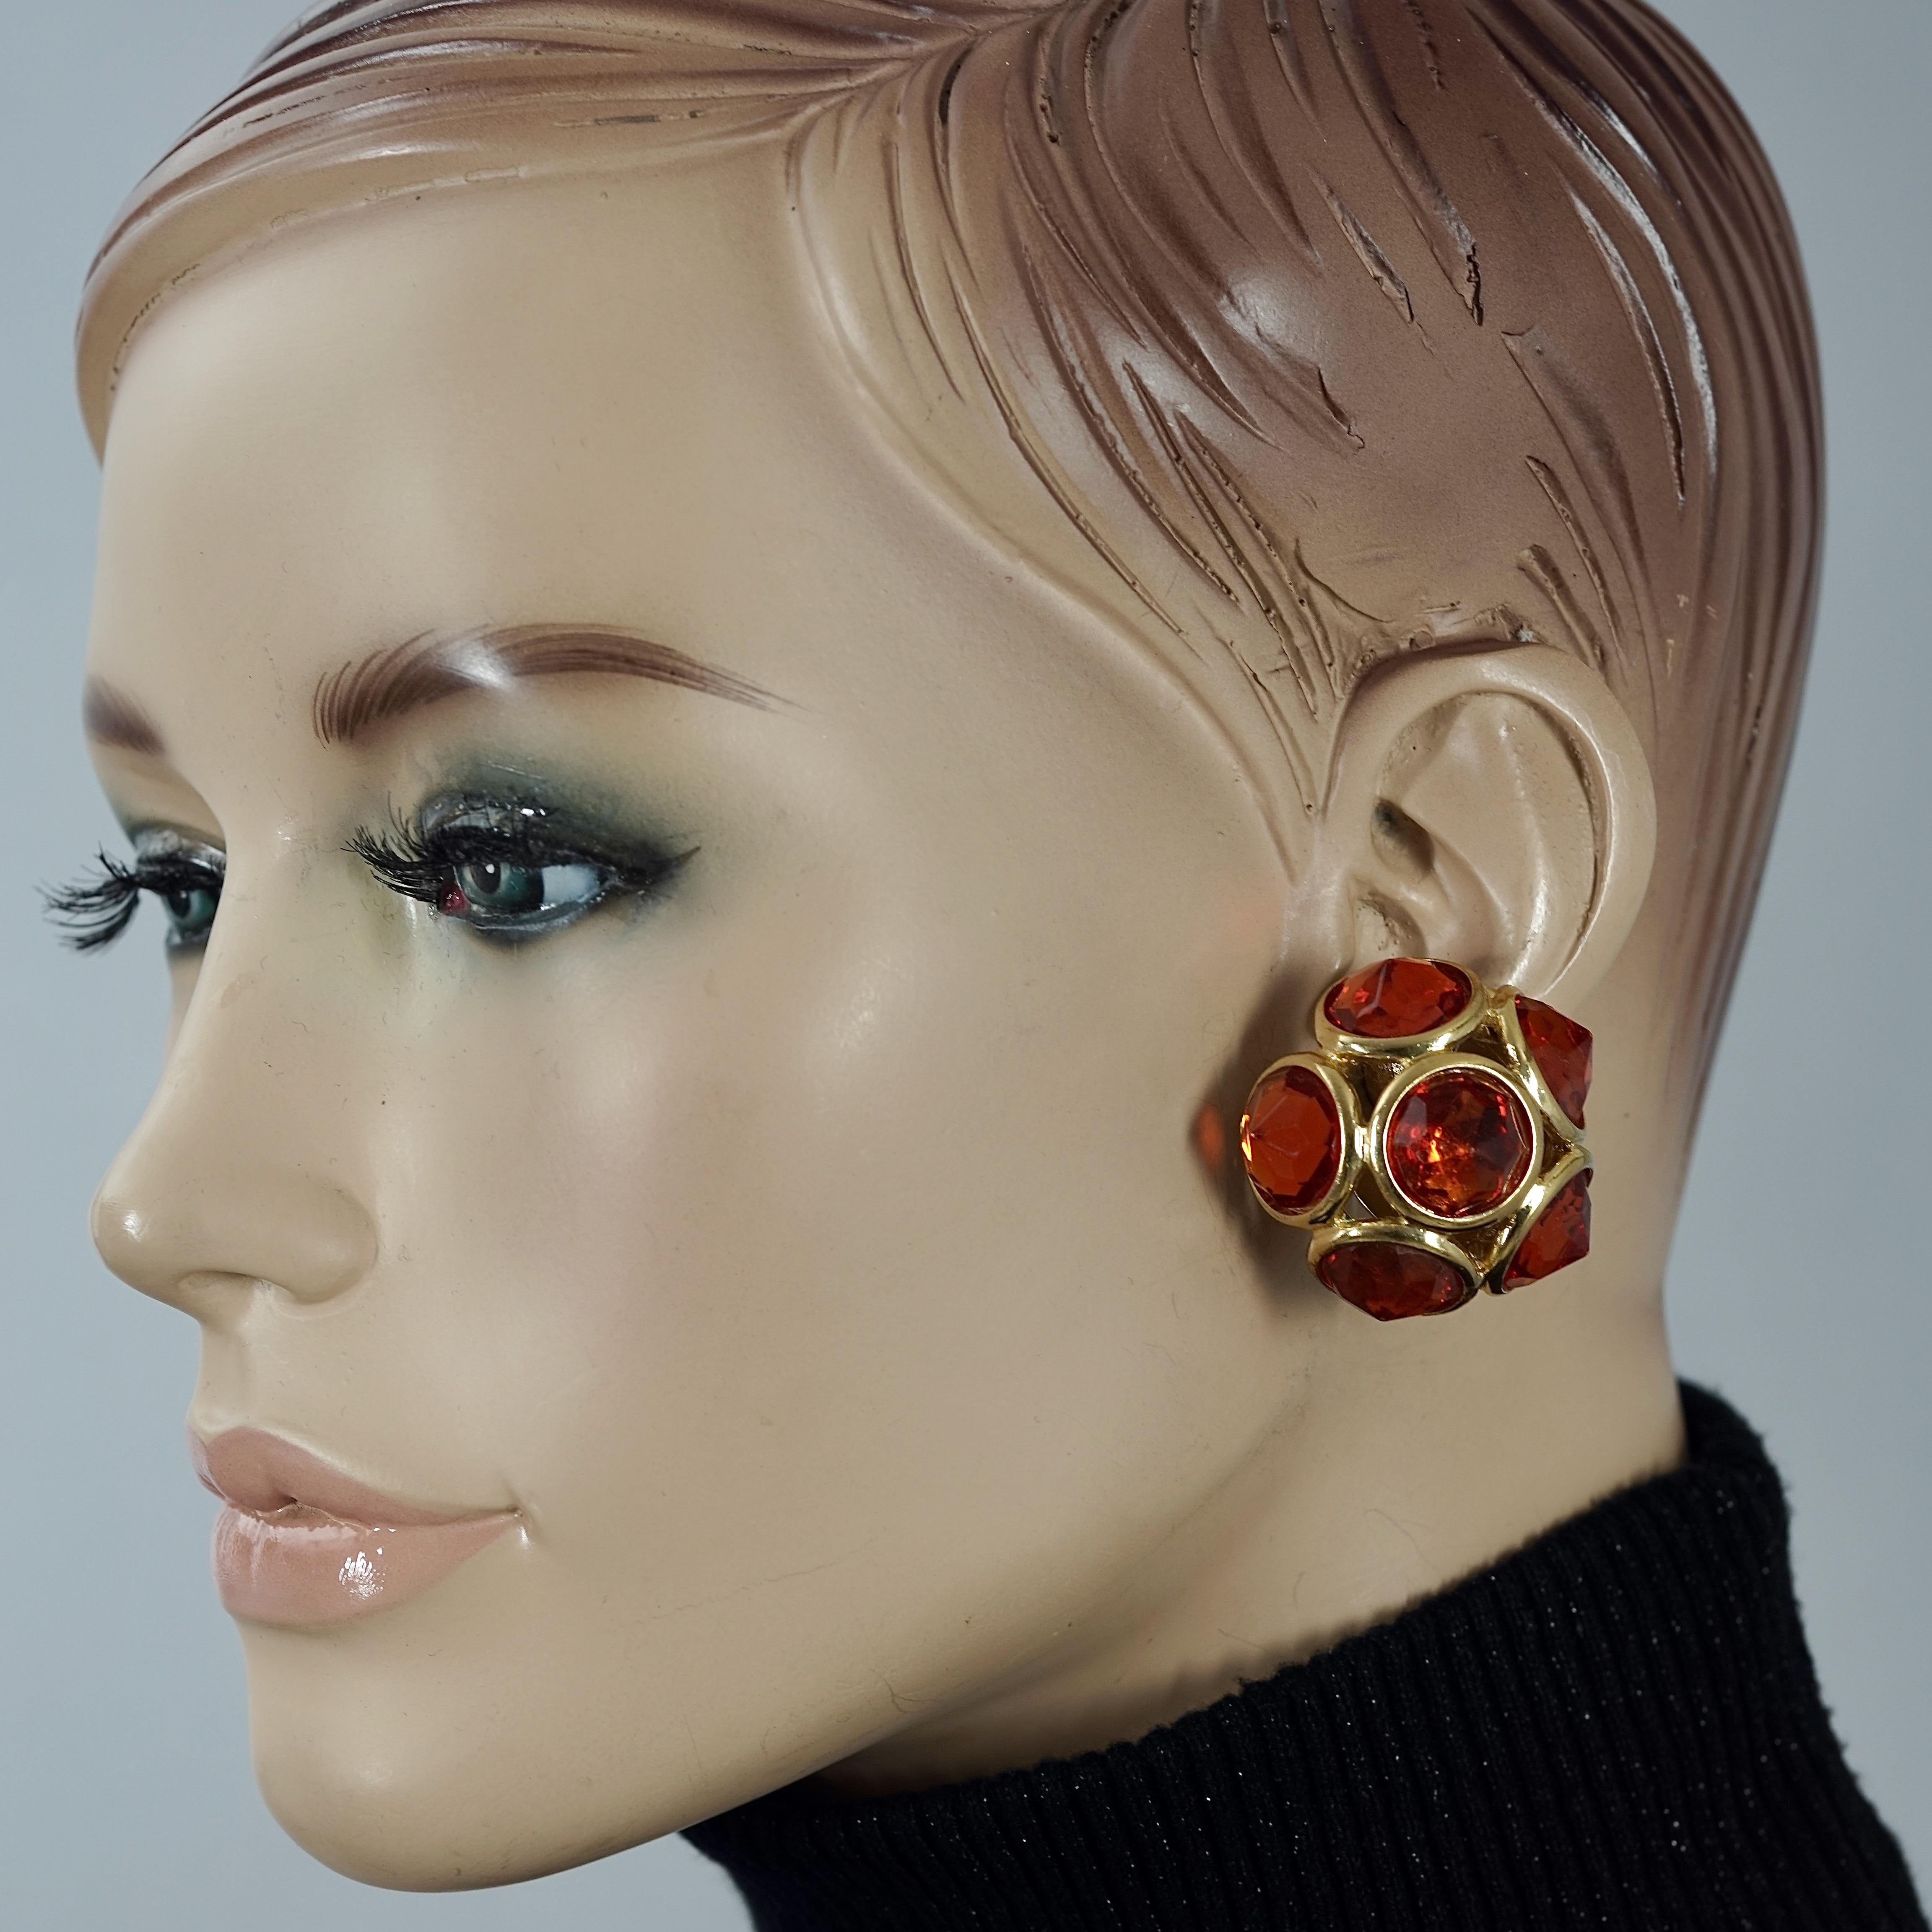 Vintage YVES SAINT LAURENT Ysl Amber Flower Earrings

Measurements:
Height: 1.37 inches (3.5 cm)
Width: 1.37 inches (3.5 cm)
Depth: 0.86 inch (2.2 cm)
Weight per Earring: 18 grams

Features:
- 100% Authentic Yves Saint Laurent.
- Faceted stones in